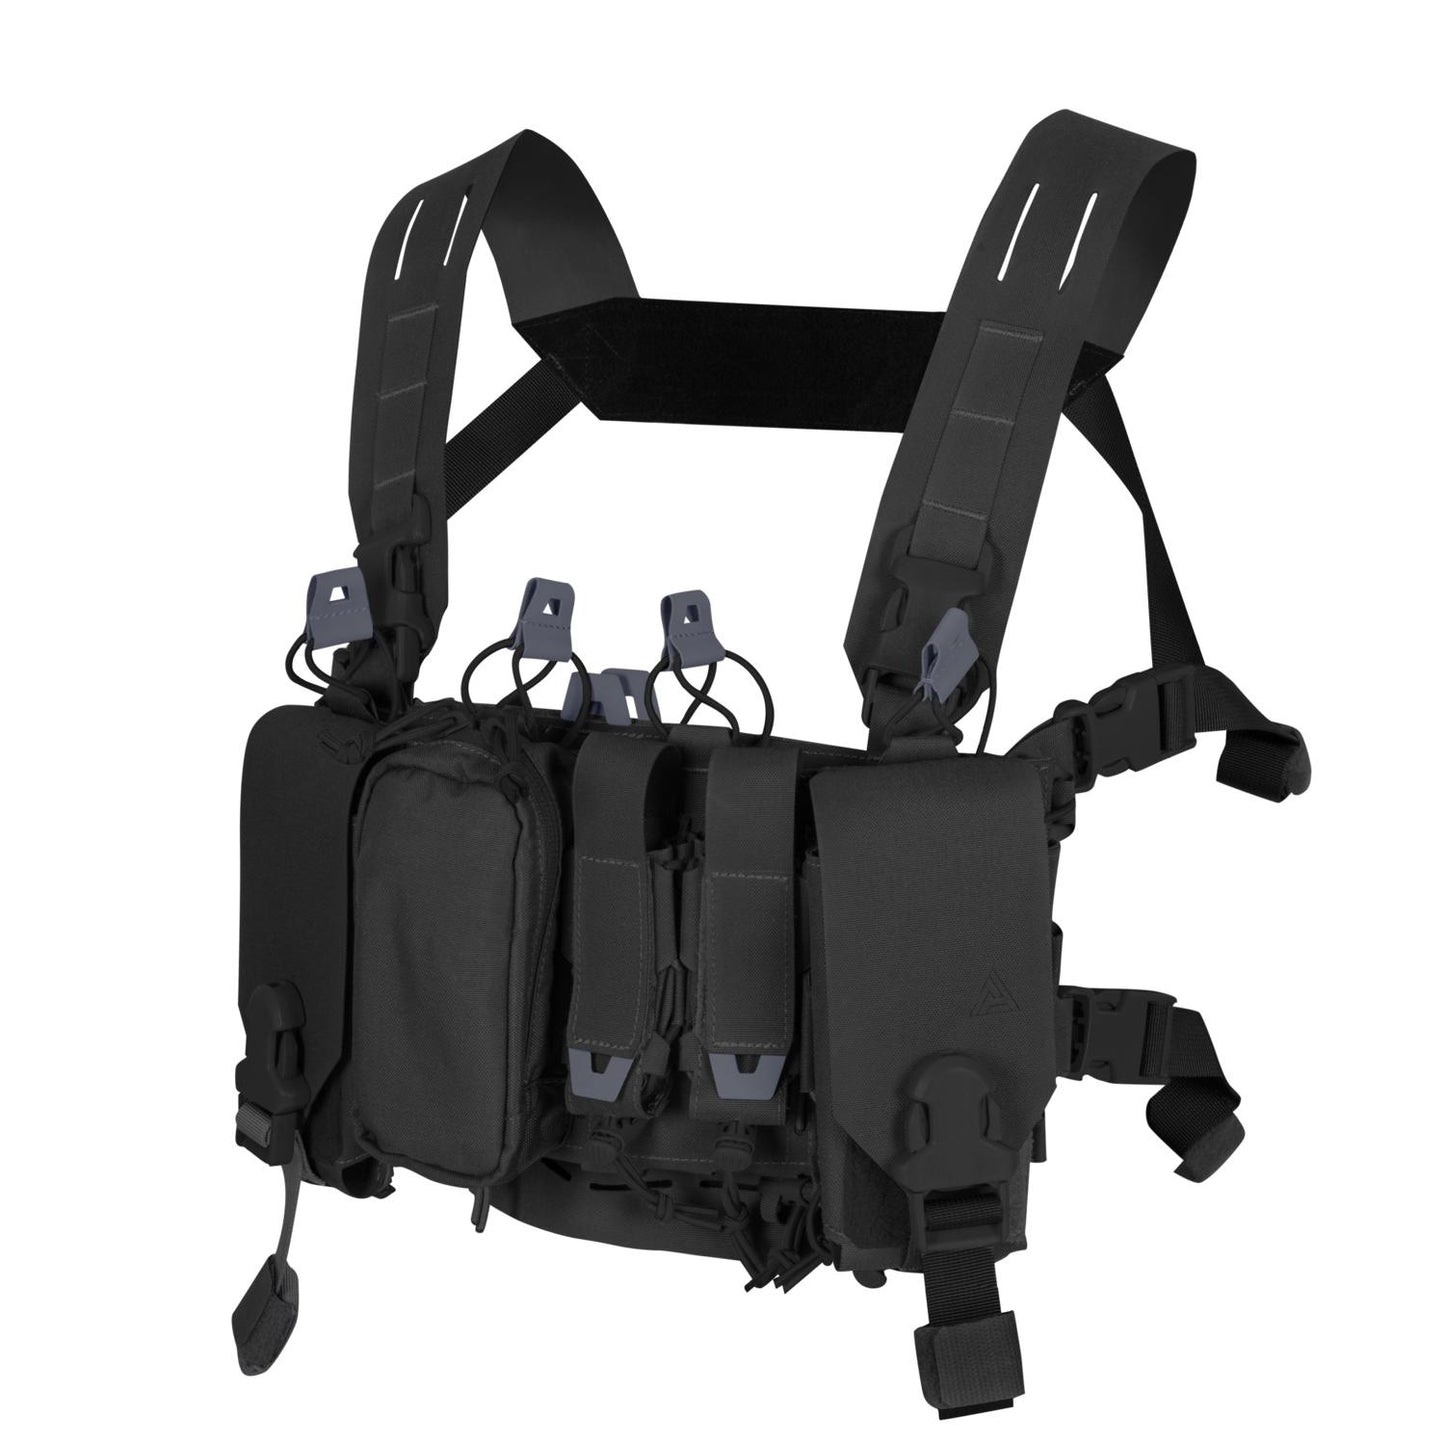 DIRECT ACTION THUNDERBOLT COMPACT CHEST RIG